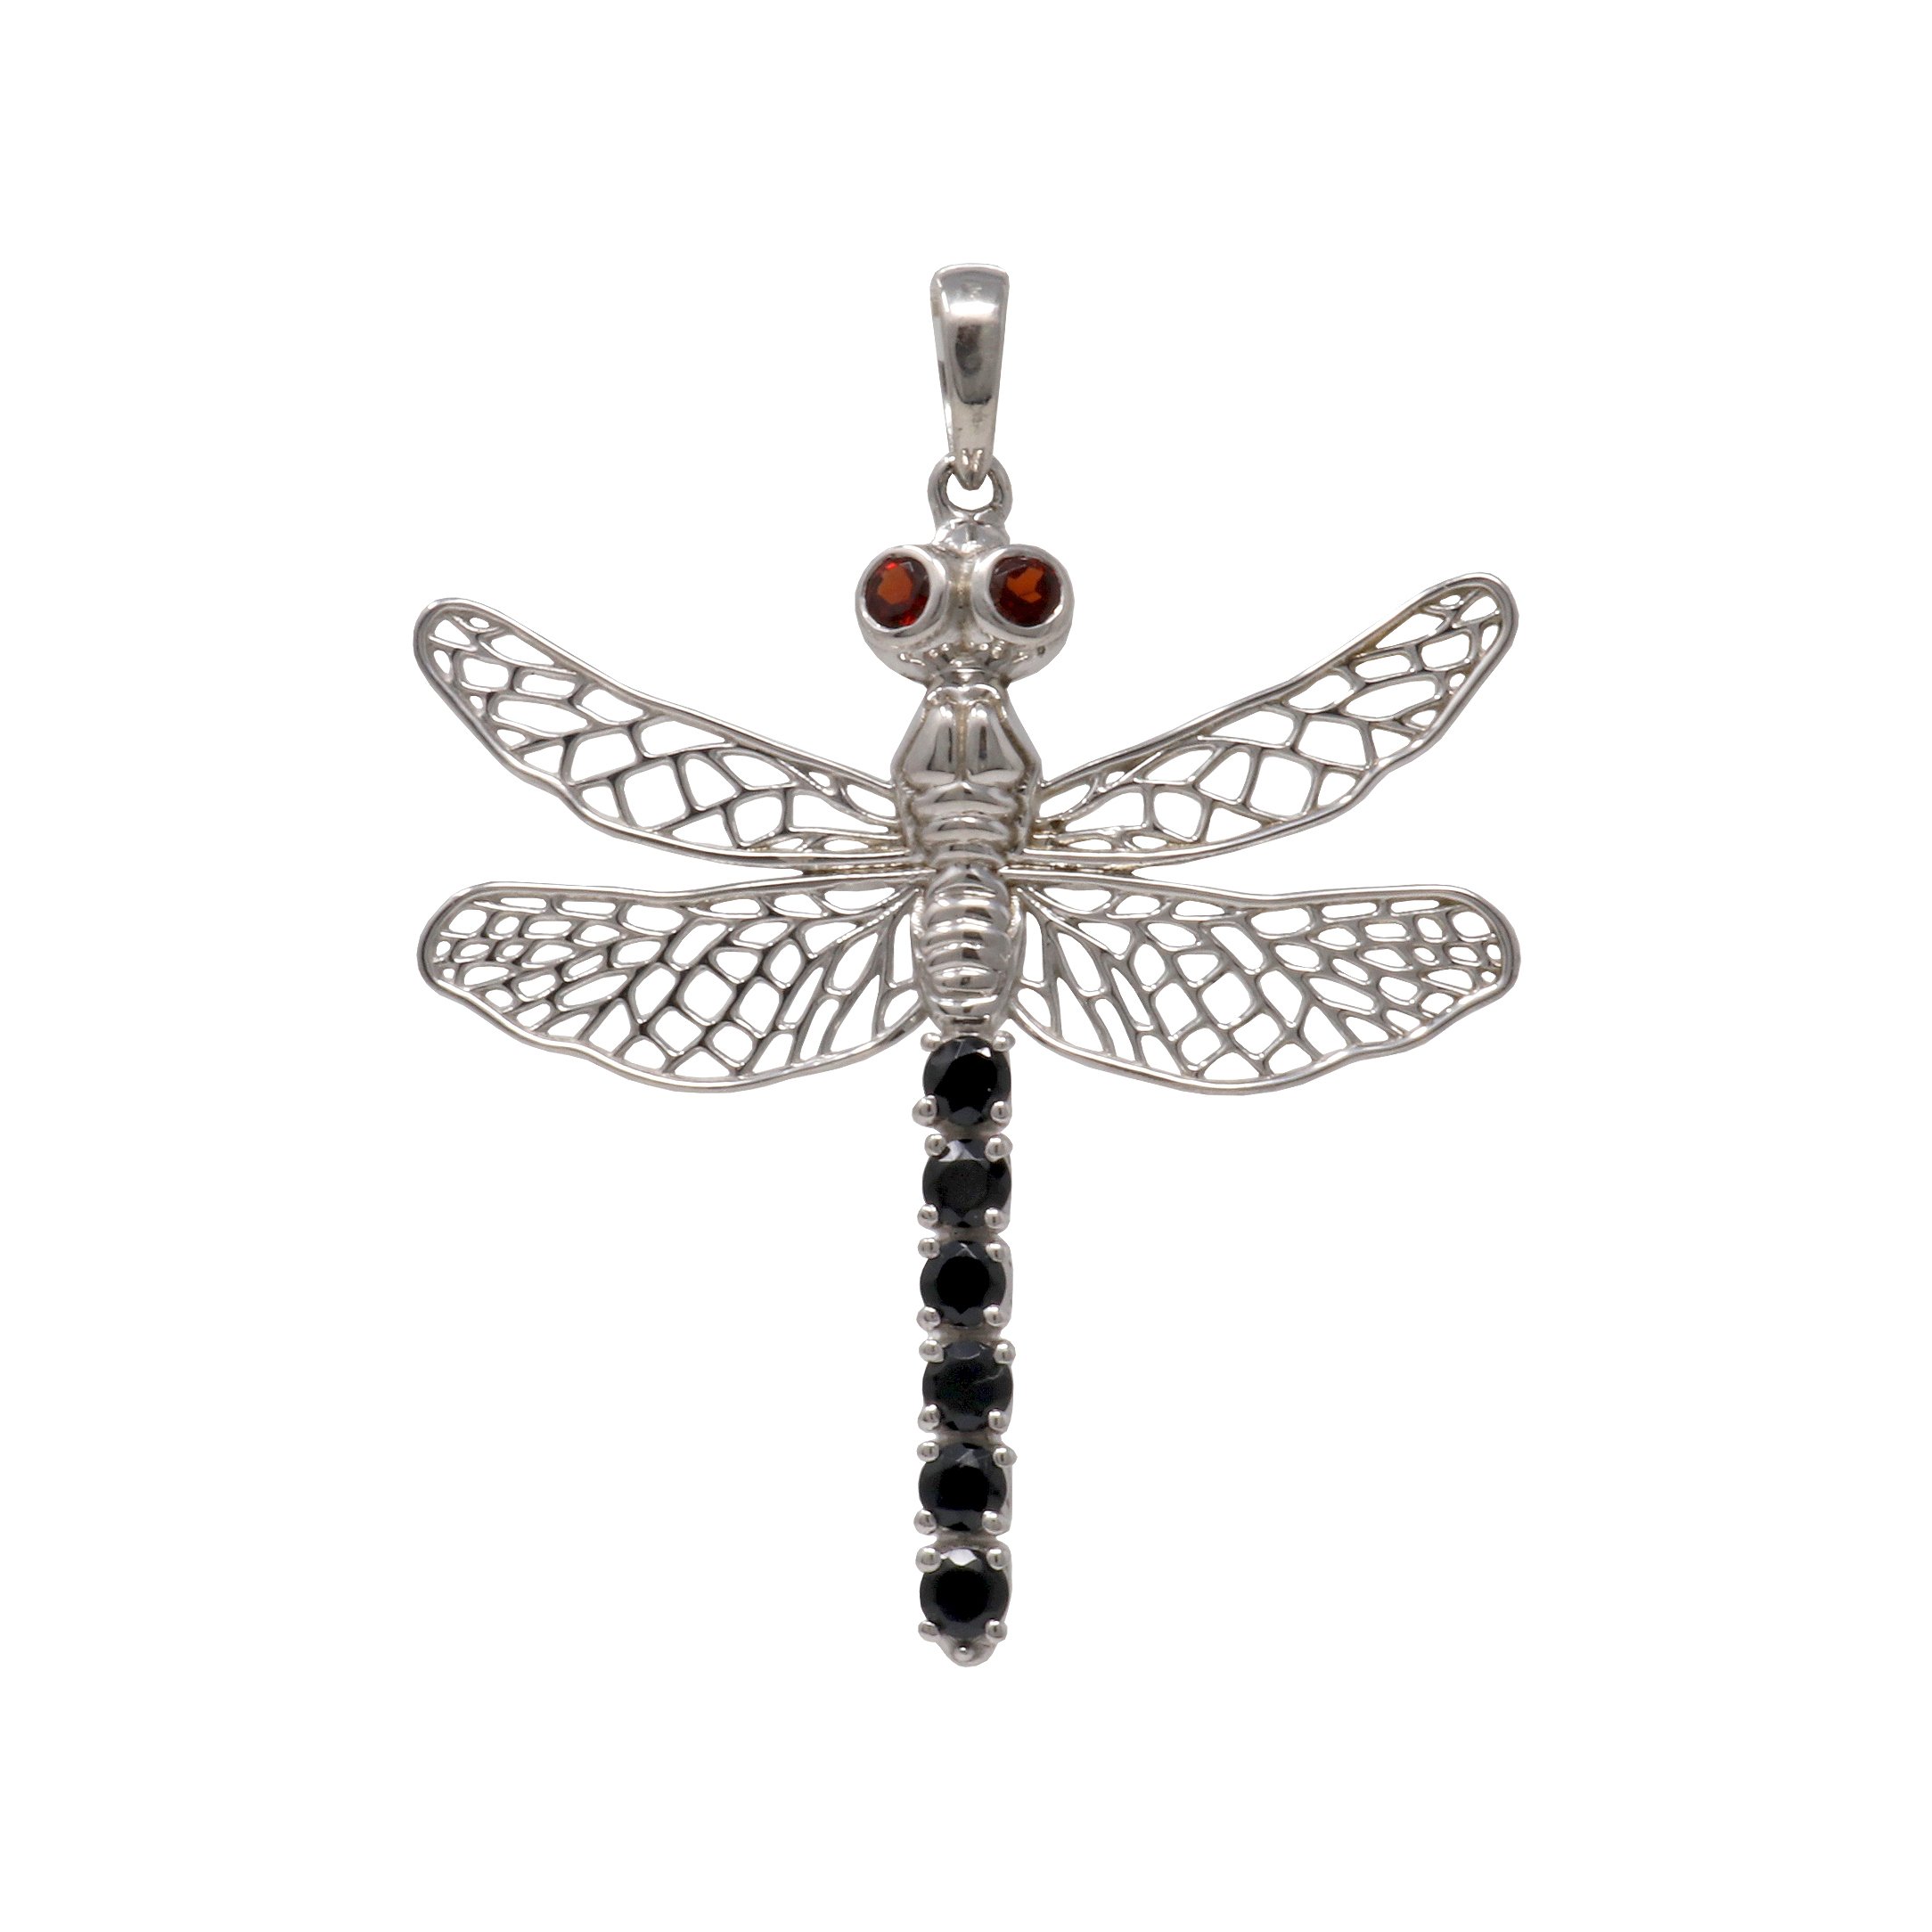 Black Spinel Dragonfly Pendant - Faceted Rounds With Faceted Garnet Round Eyes & Intricate Silver Wings & Body